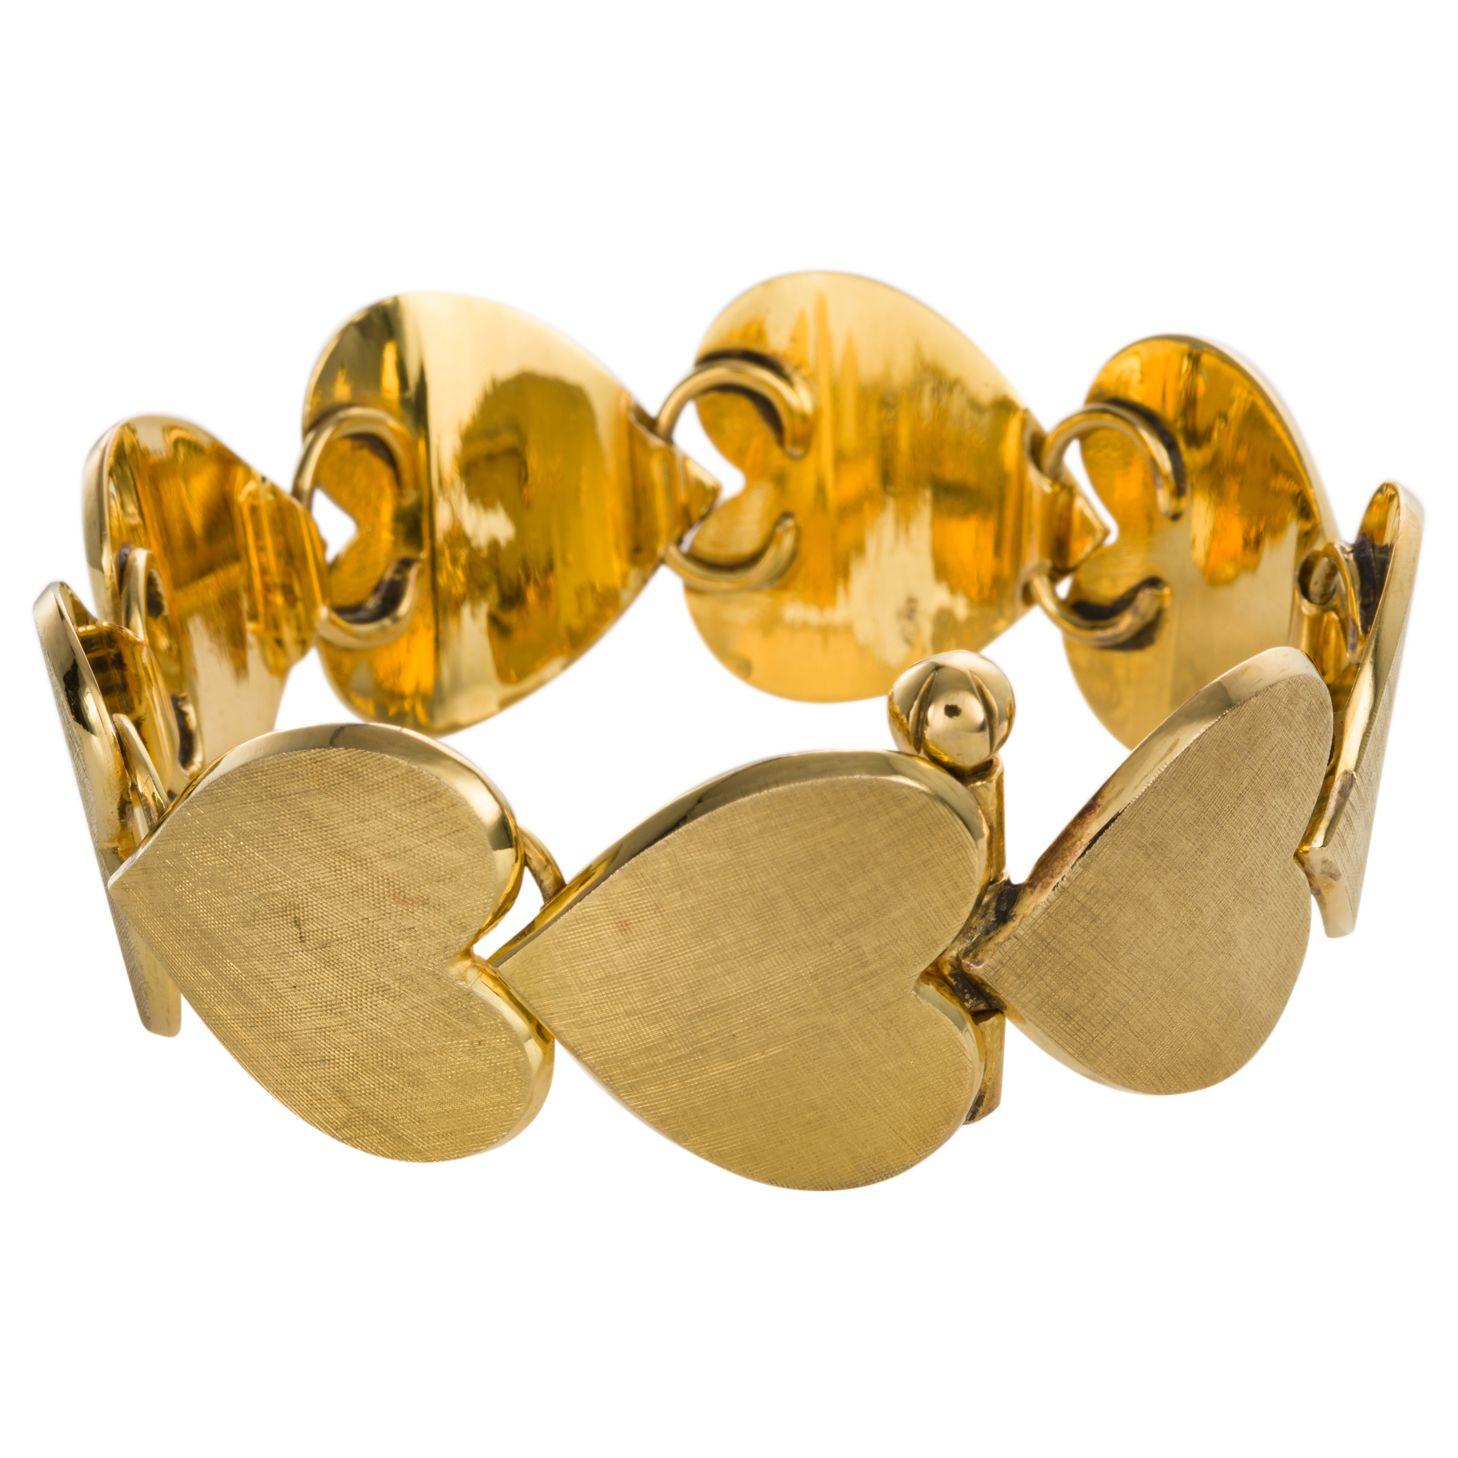 Are you one of those people who love heart jewellery? Well here is something that will make your heart flutter. This solid 18k yellow gold textured heart bracelet which consists of 9 beautifully crafted heart motifs displaying a detailed